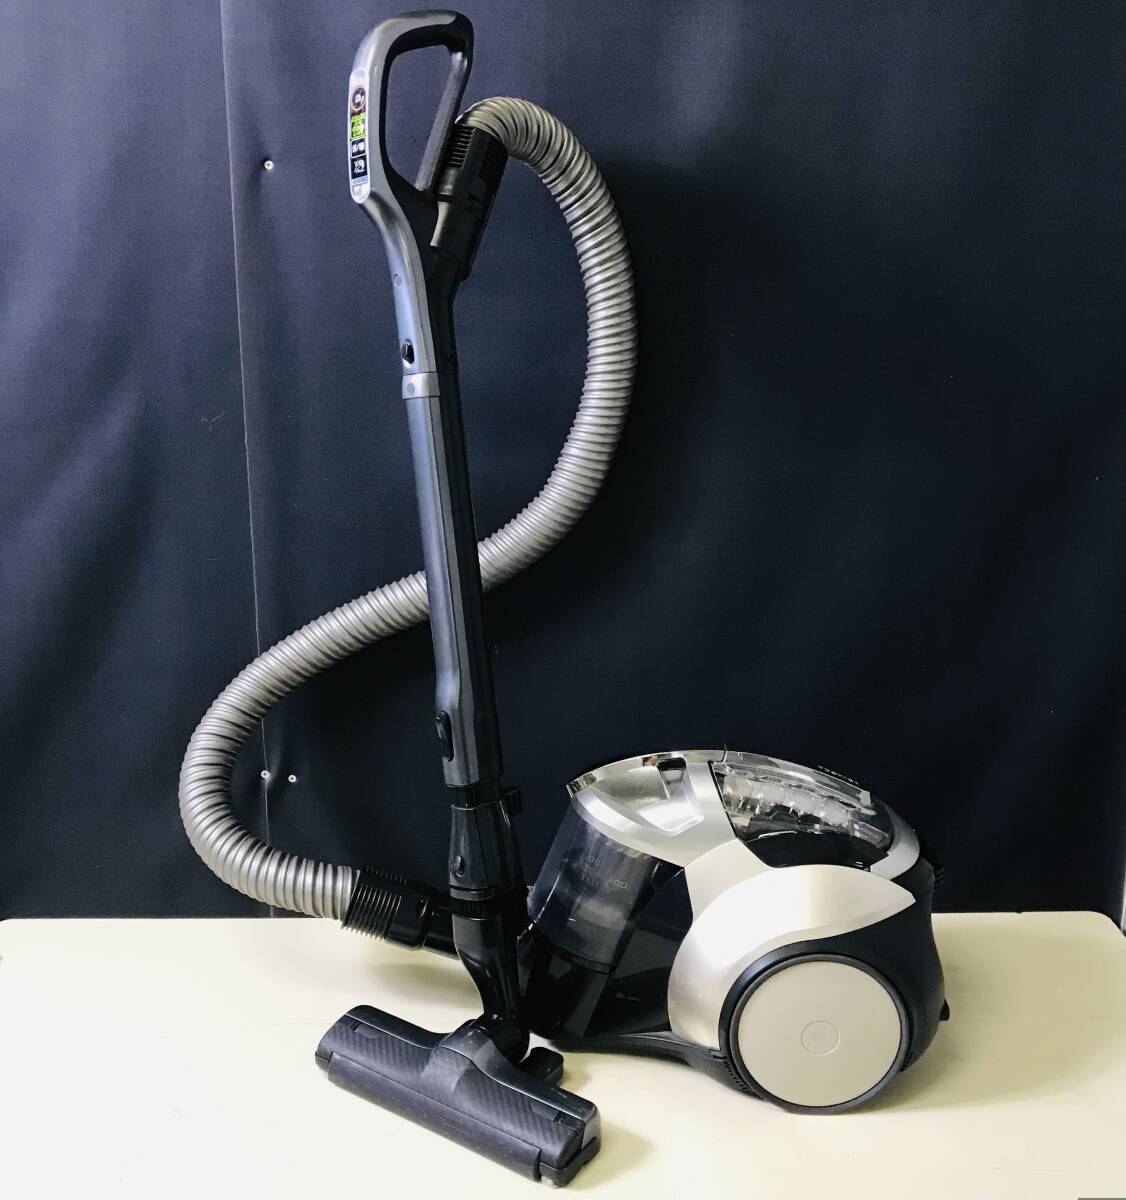 QA1925 operation verification TOSHIBA Toshiba cleaner VC-YA712(N) 2014 year made Torneo Cyclone cleaner 100V 850W 50/60Hz vacuum cleaner silver inspection K